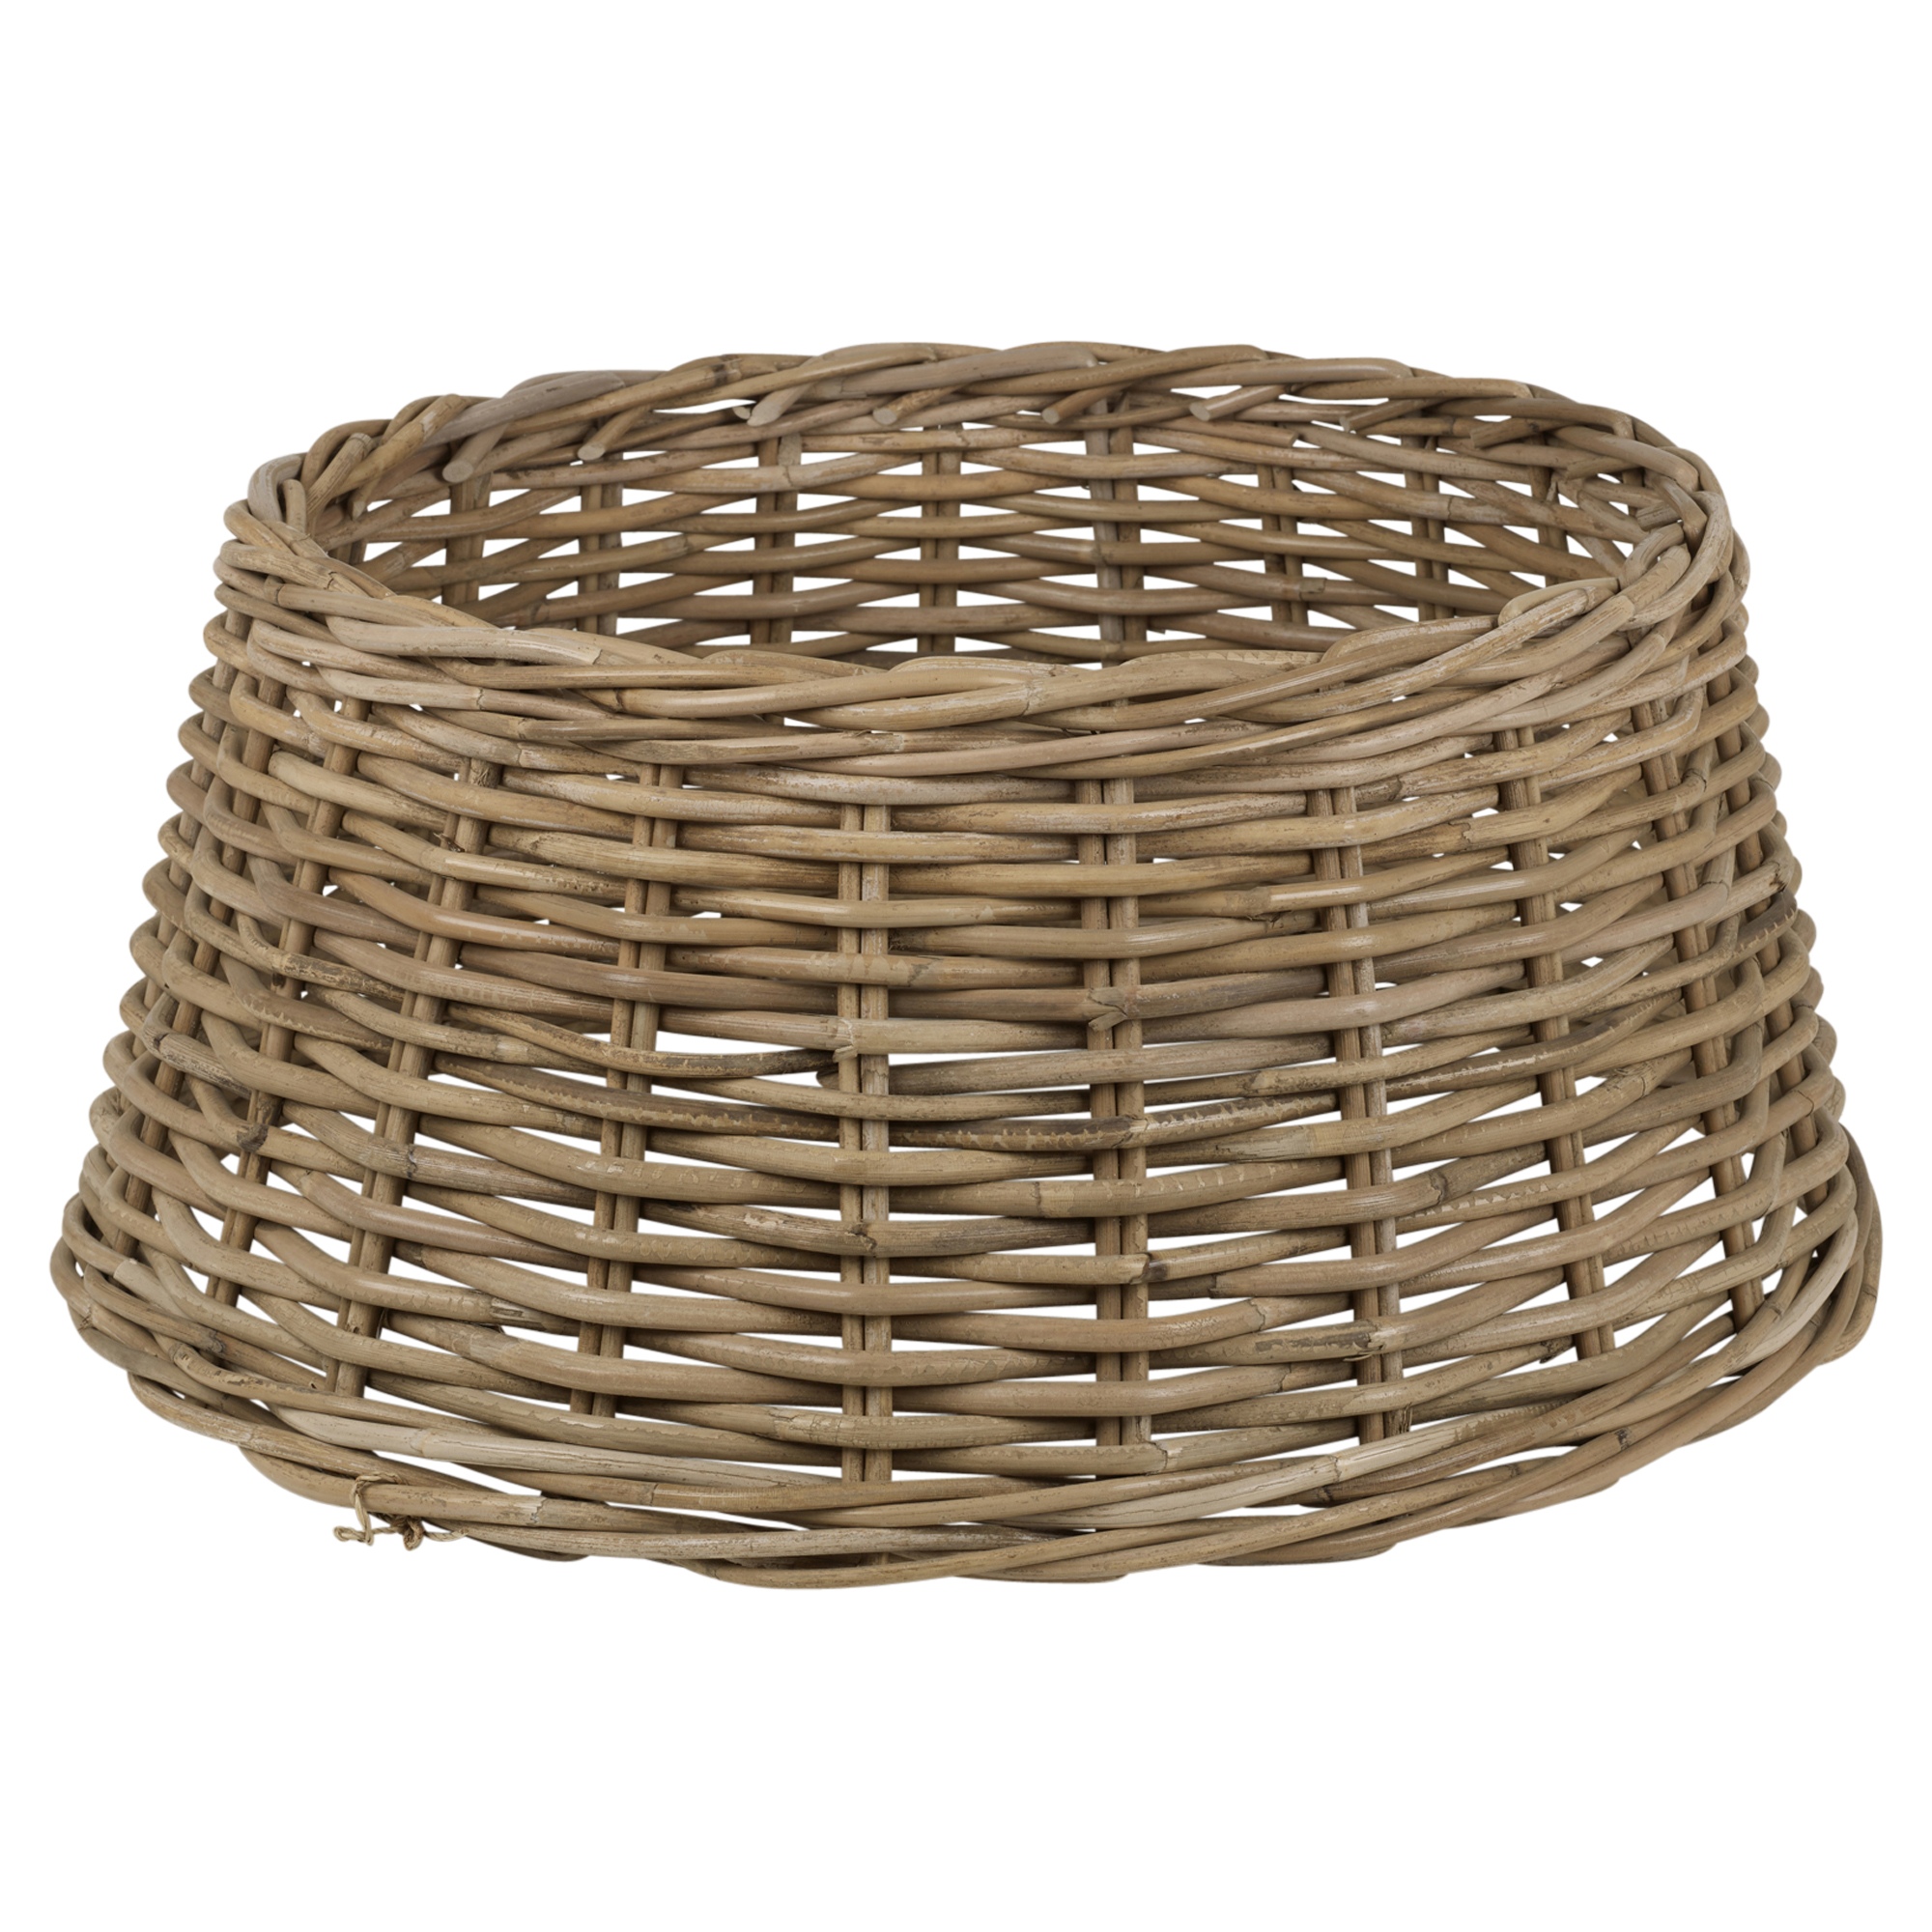 Large Willow Christmas Tree Skirt Xmas Rattan Wicker Natural Base Cover Stand Ebay